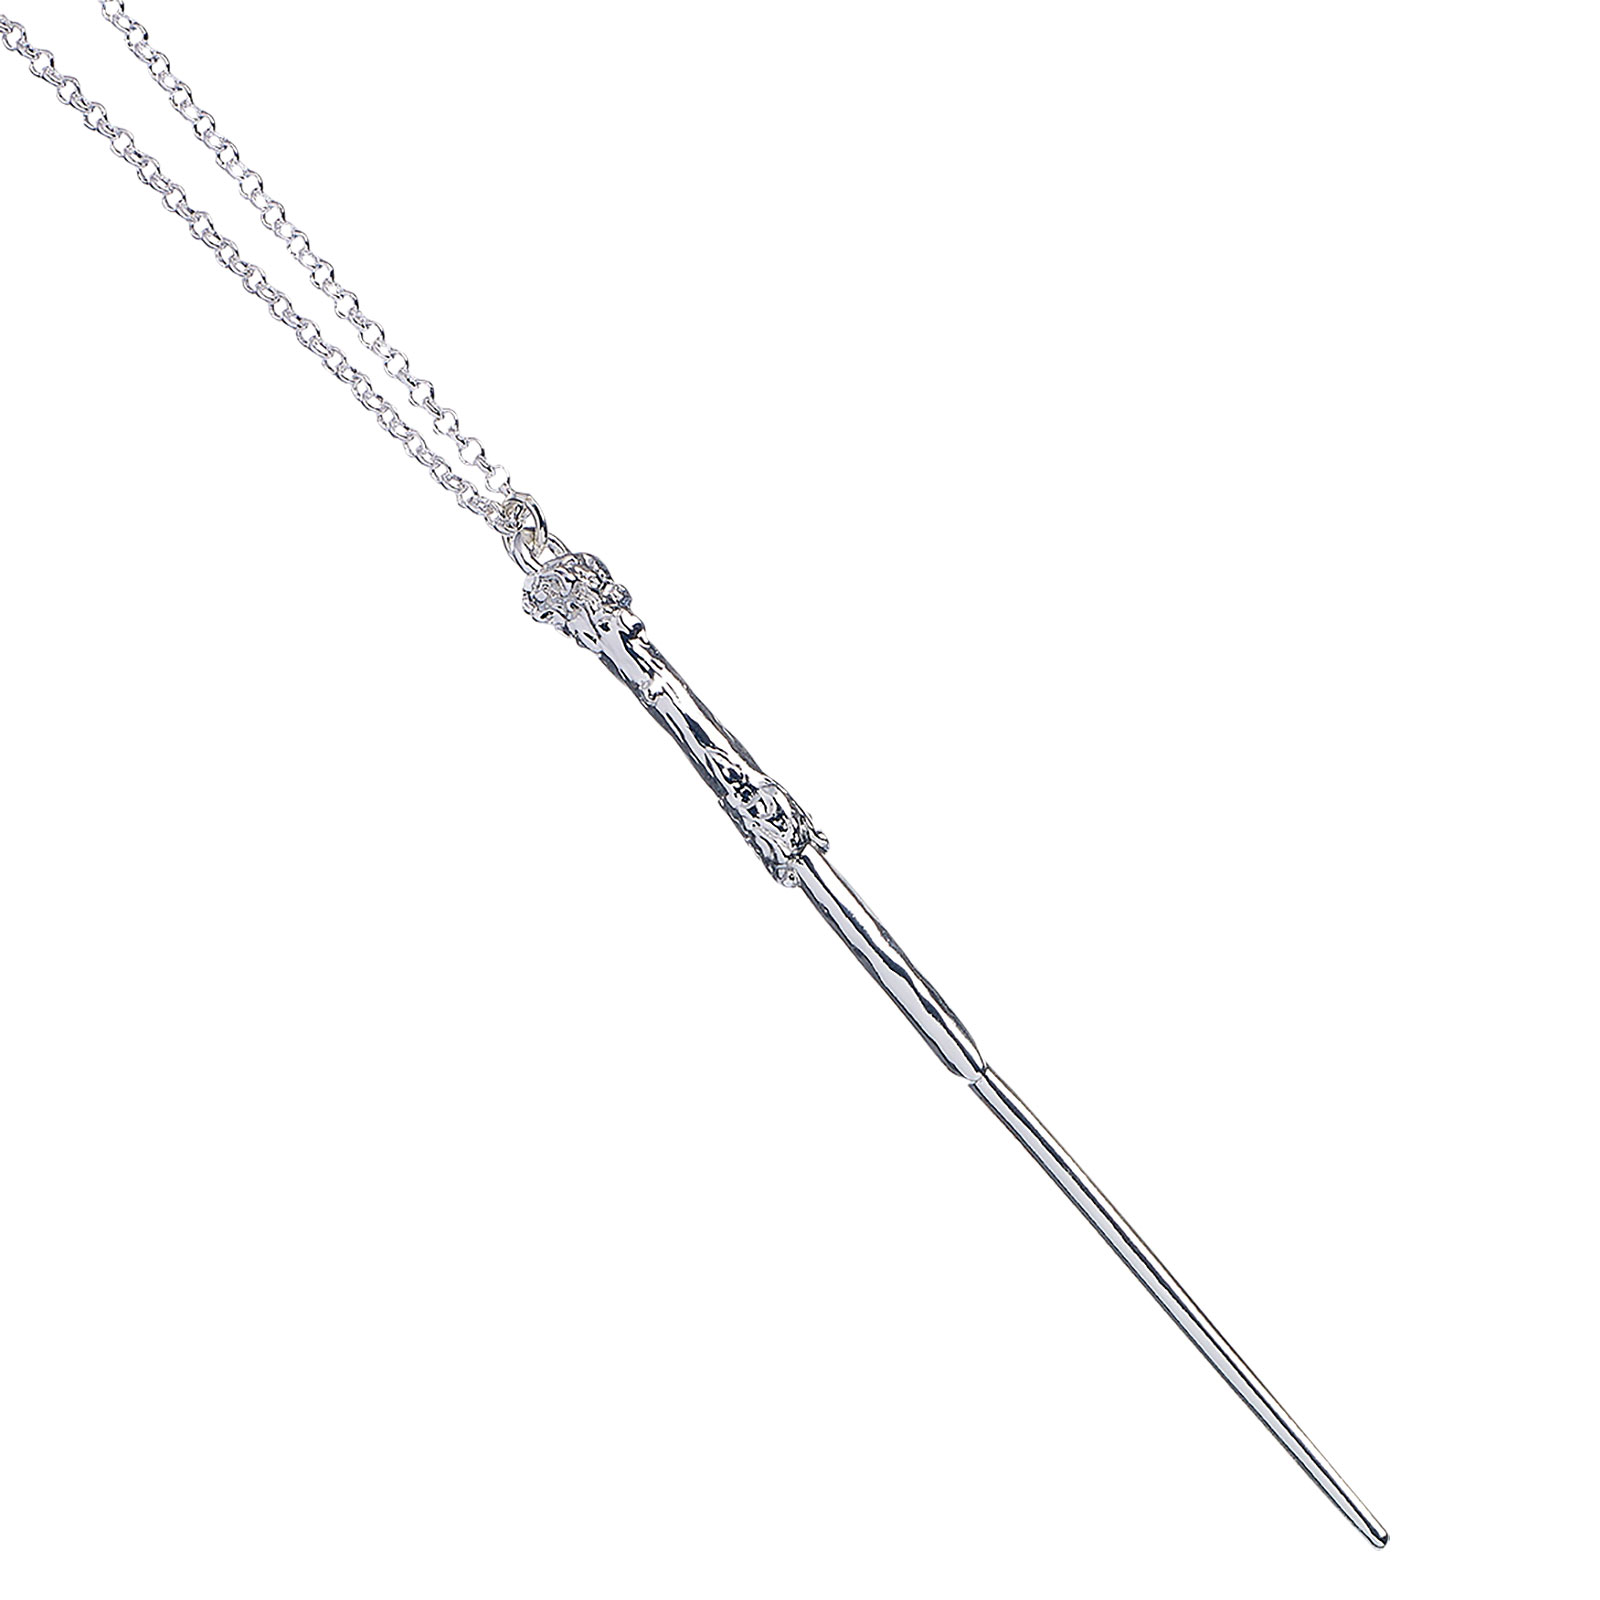 Harry Potter - Magic Wand Necklace